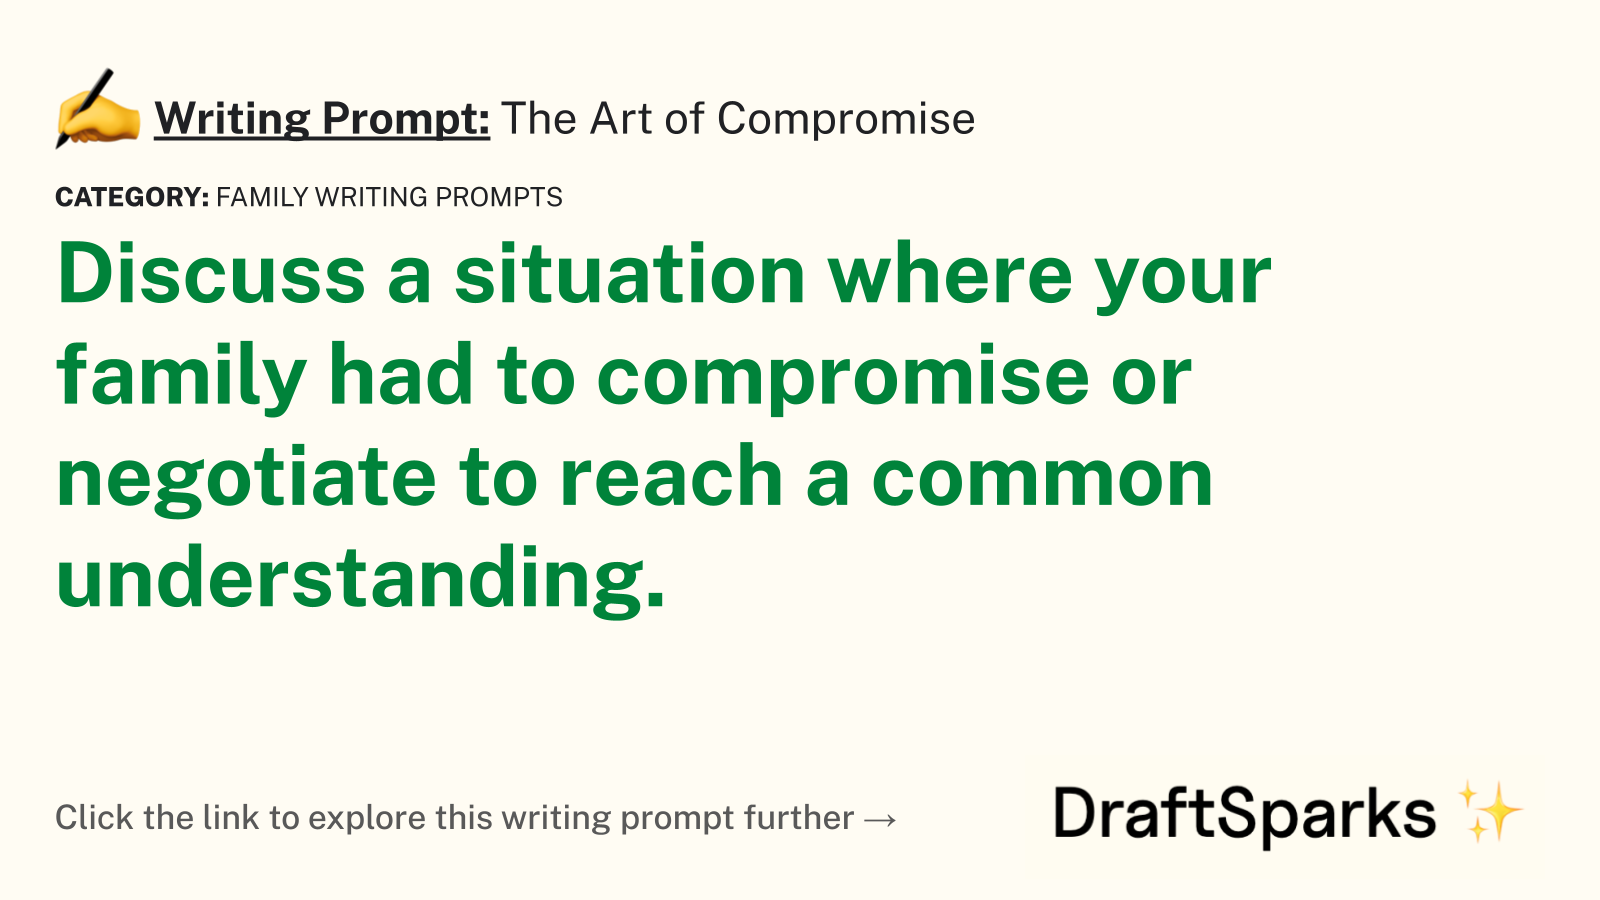 The Art of Compromise